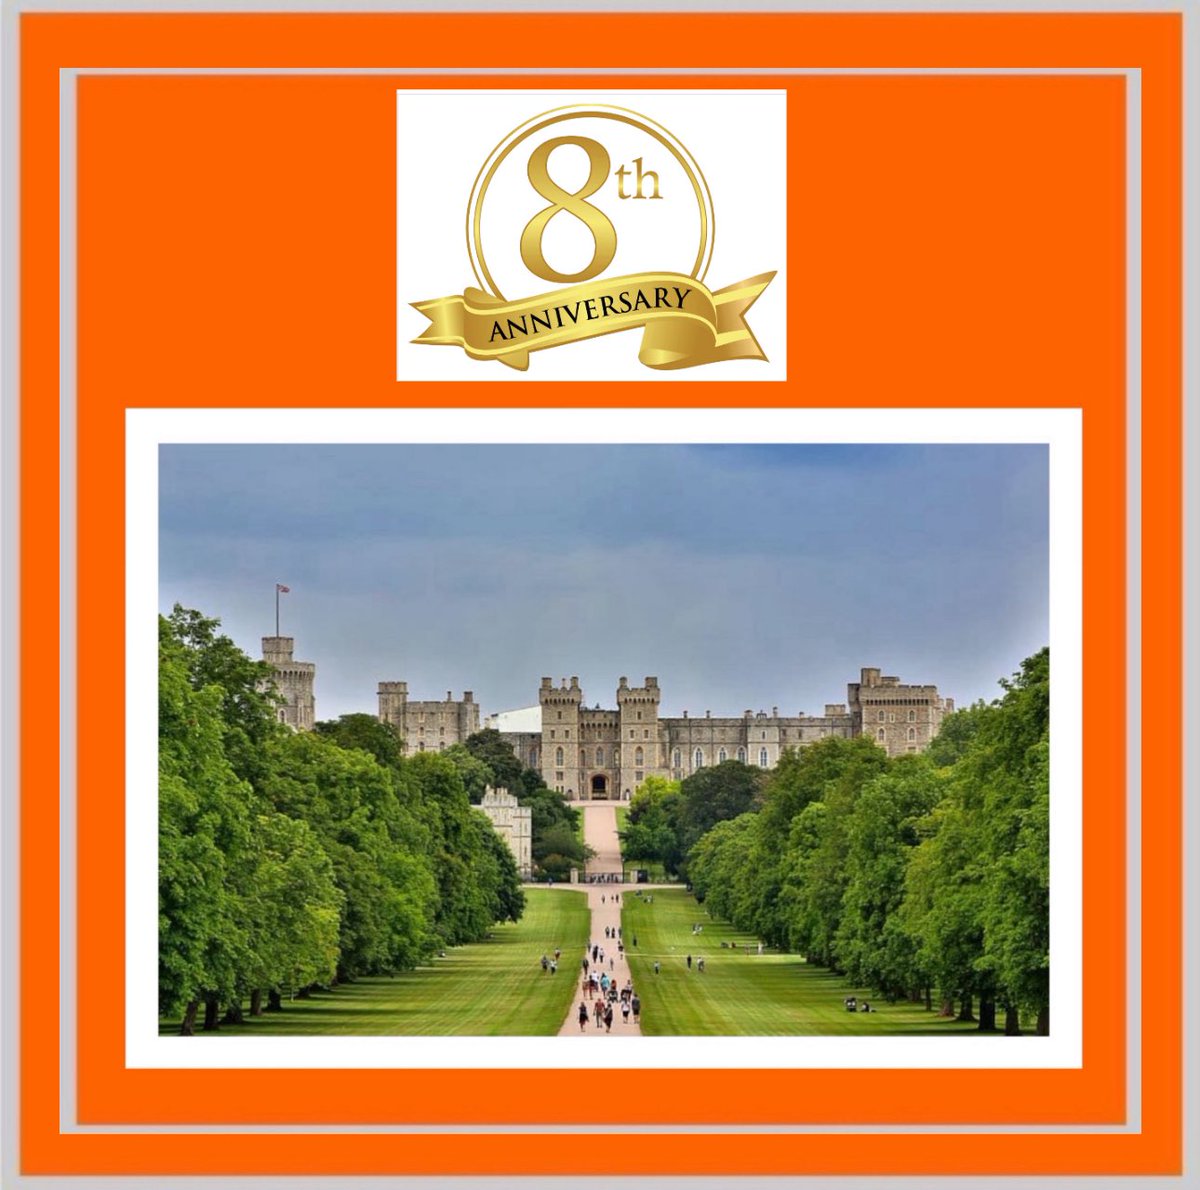 Fabulous news!! This morning we are excited to share the news that The Good Grief Trust has been invited to Windsor Castle to celebrate our 8th Anniversary this September! We are honoured to have been offered the exceptionally beautiful Moat Gardens within the private